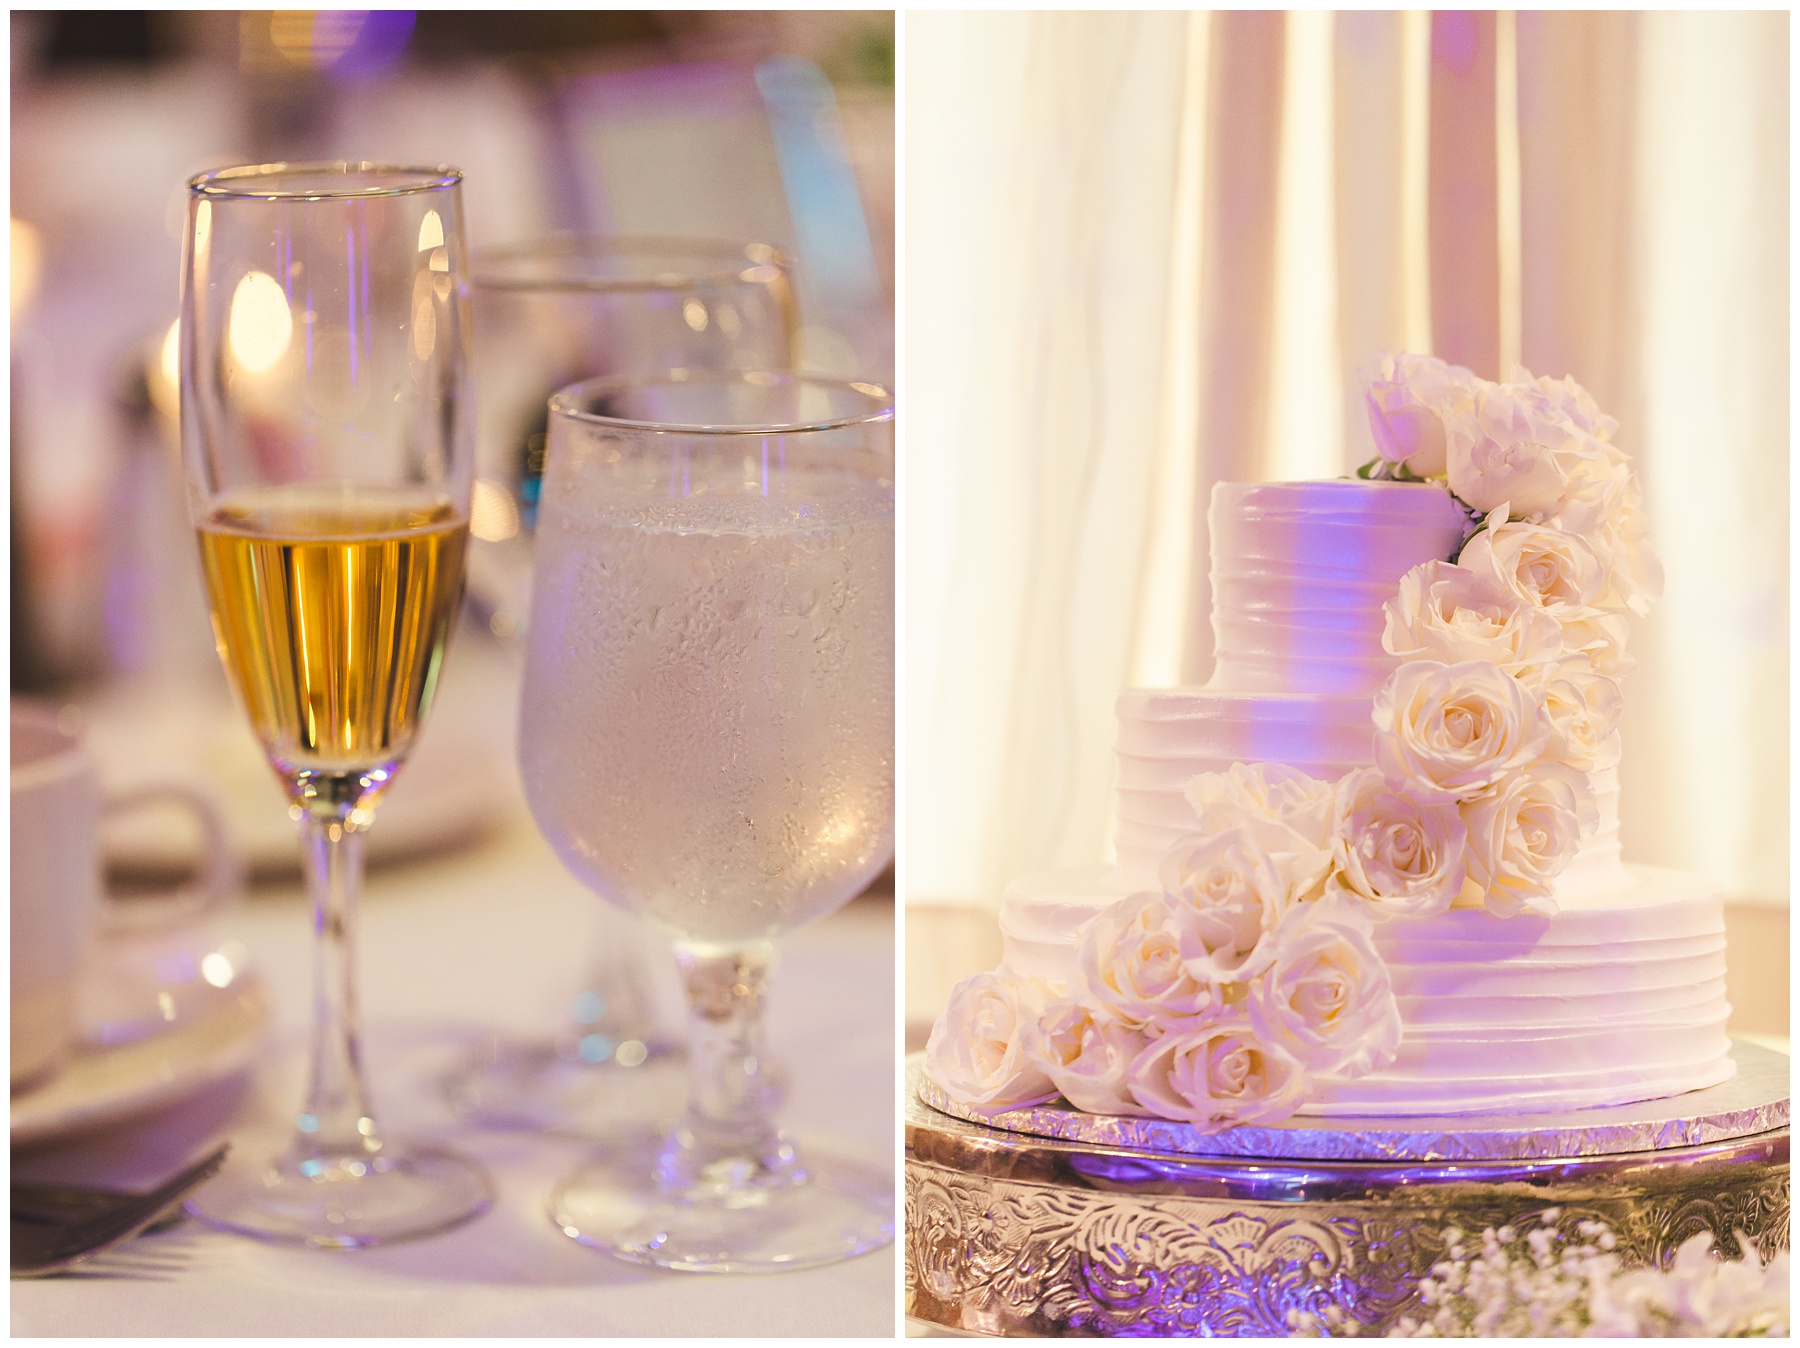 drinks and cake at the wedding reception. high-end luxury wedding